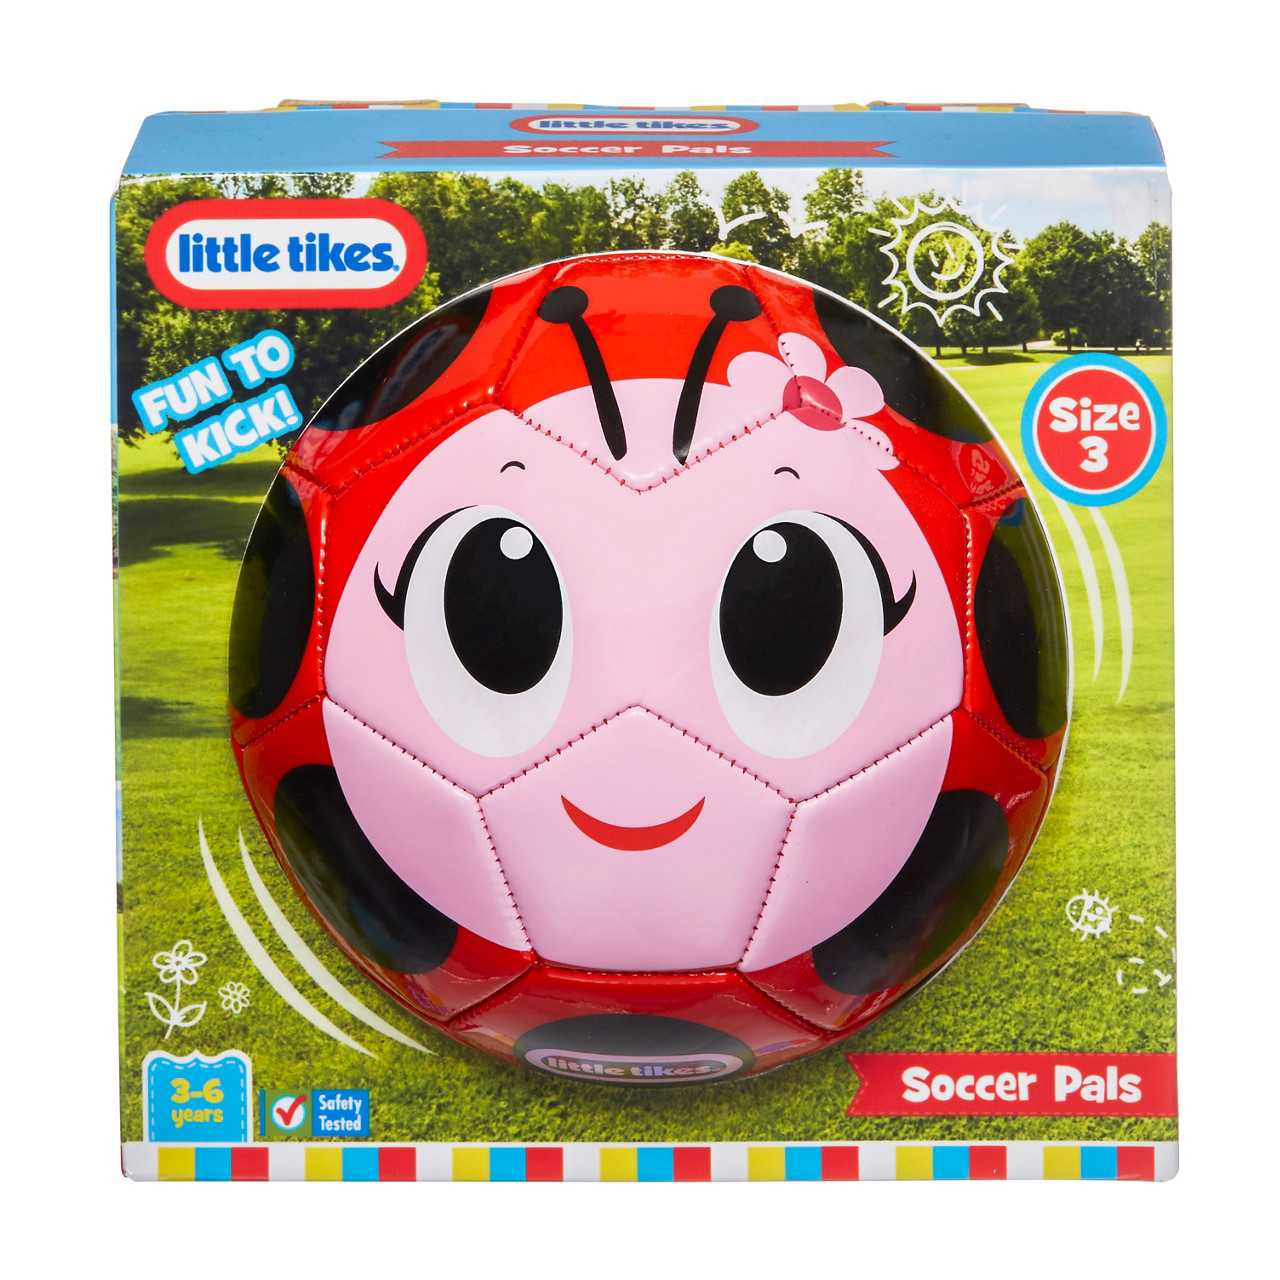 Little Tikes Soccer Pals, Sports Ball, Ages 3 Years and up, Tiger